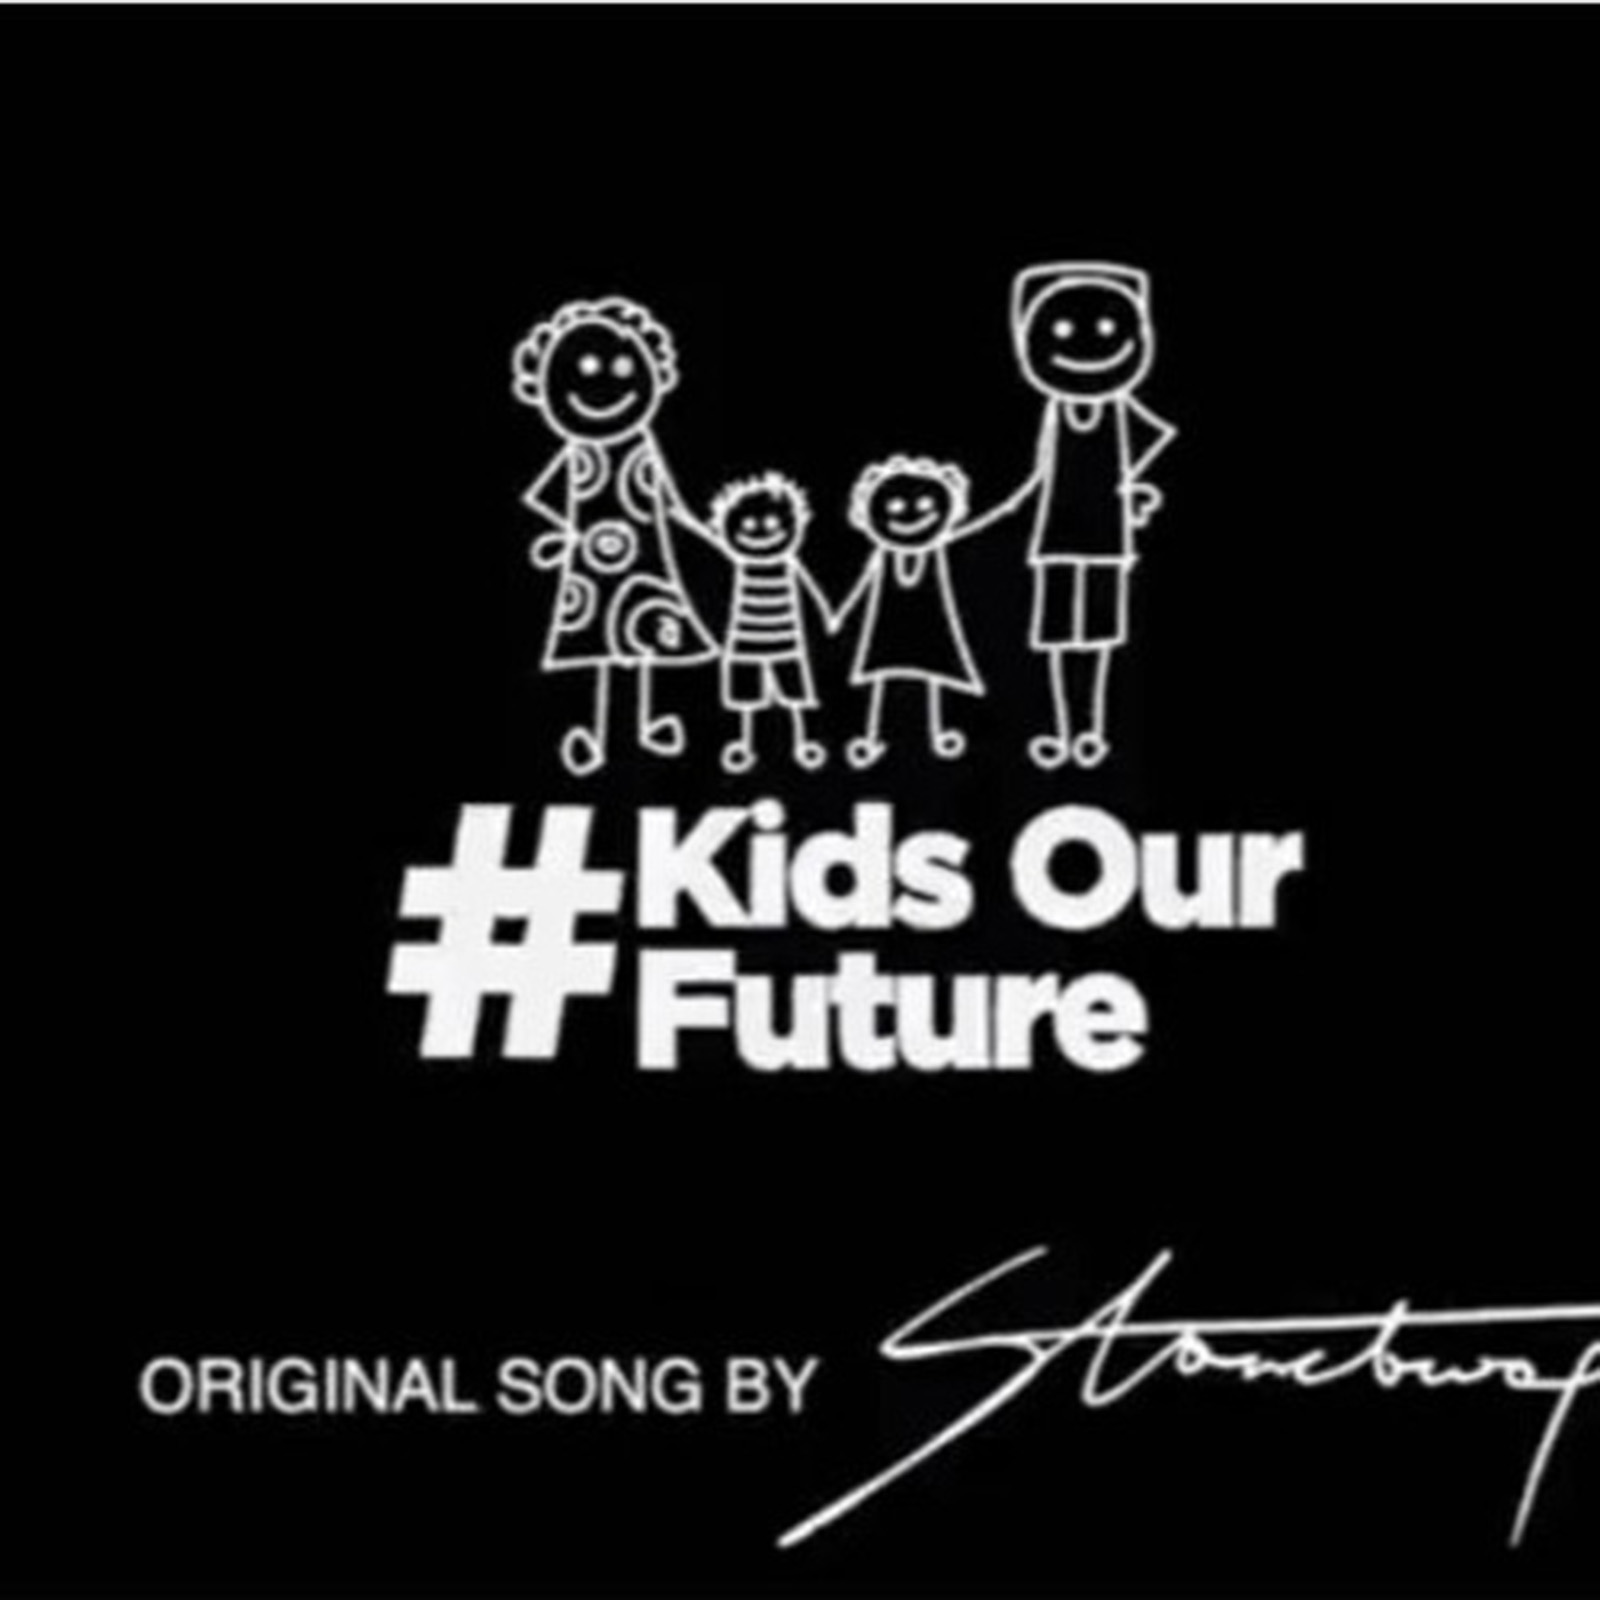 Kids Our Future by Stonebwoy